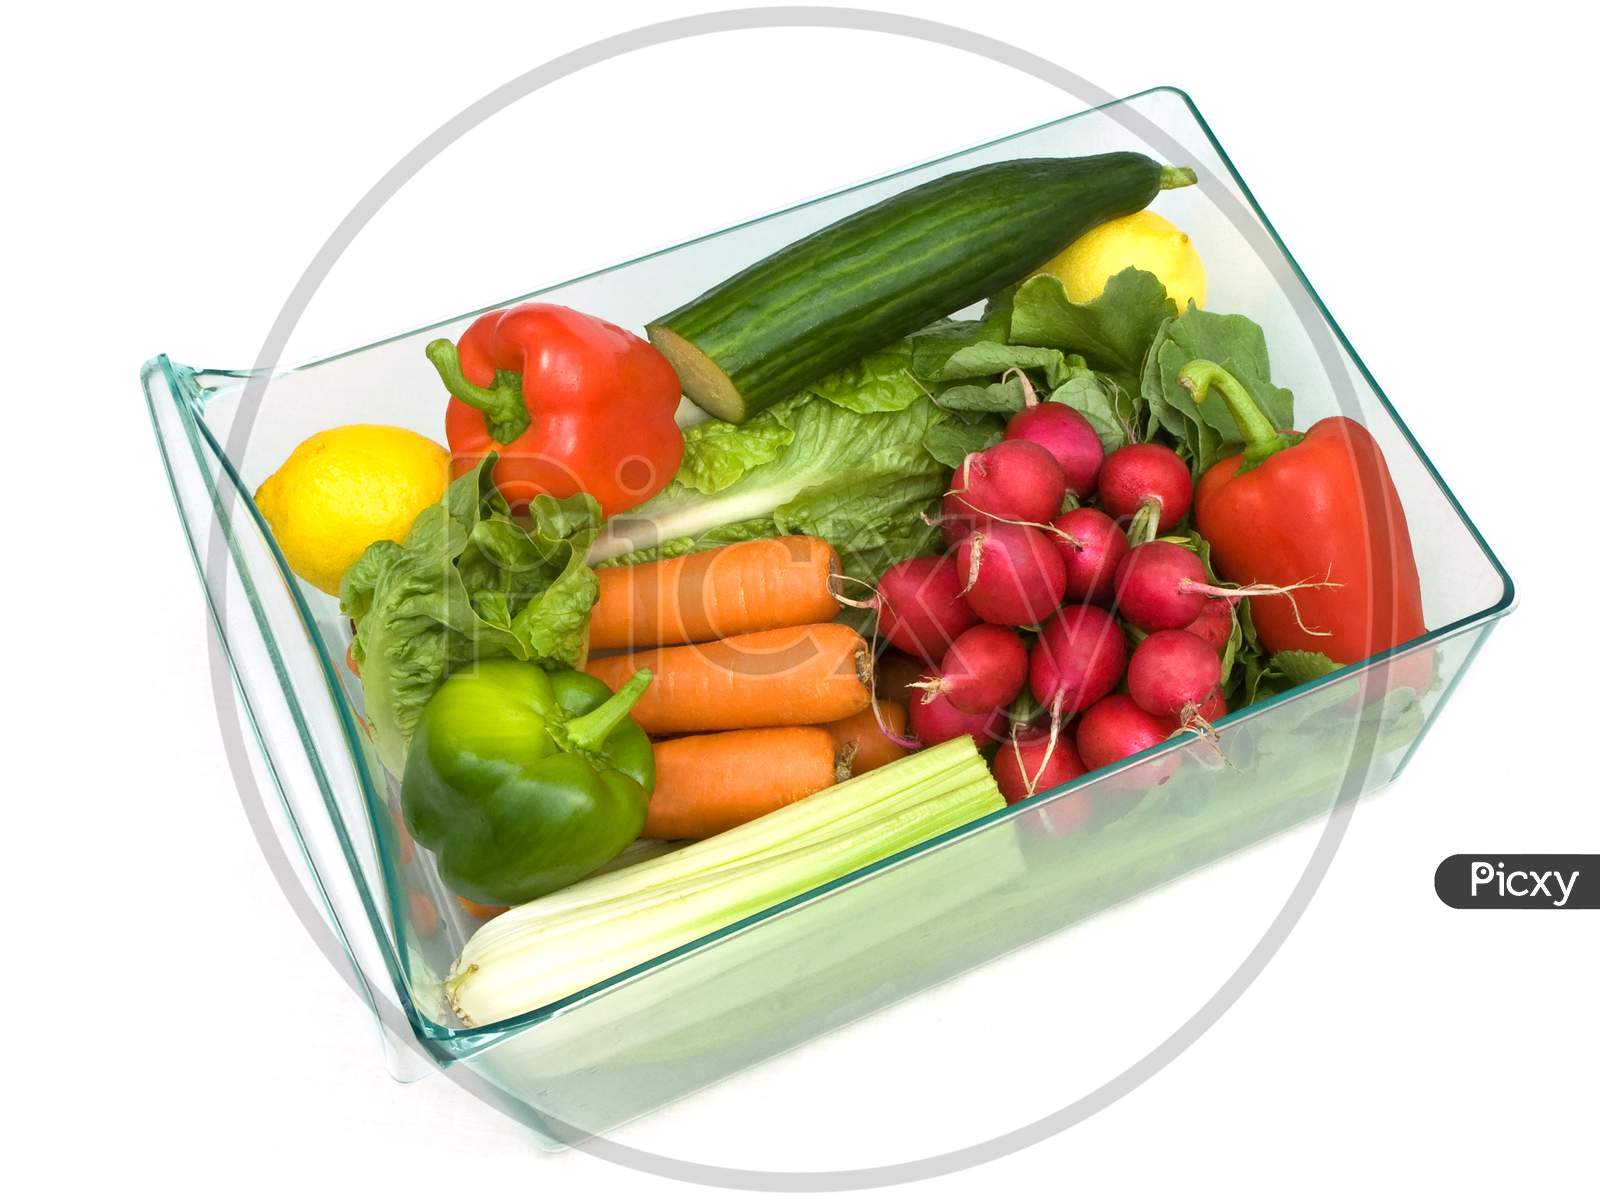 Refrigerator vegetable drawer full with a selection of vegetables